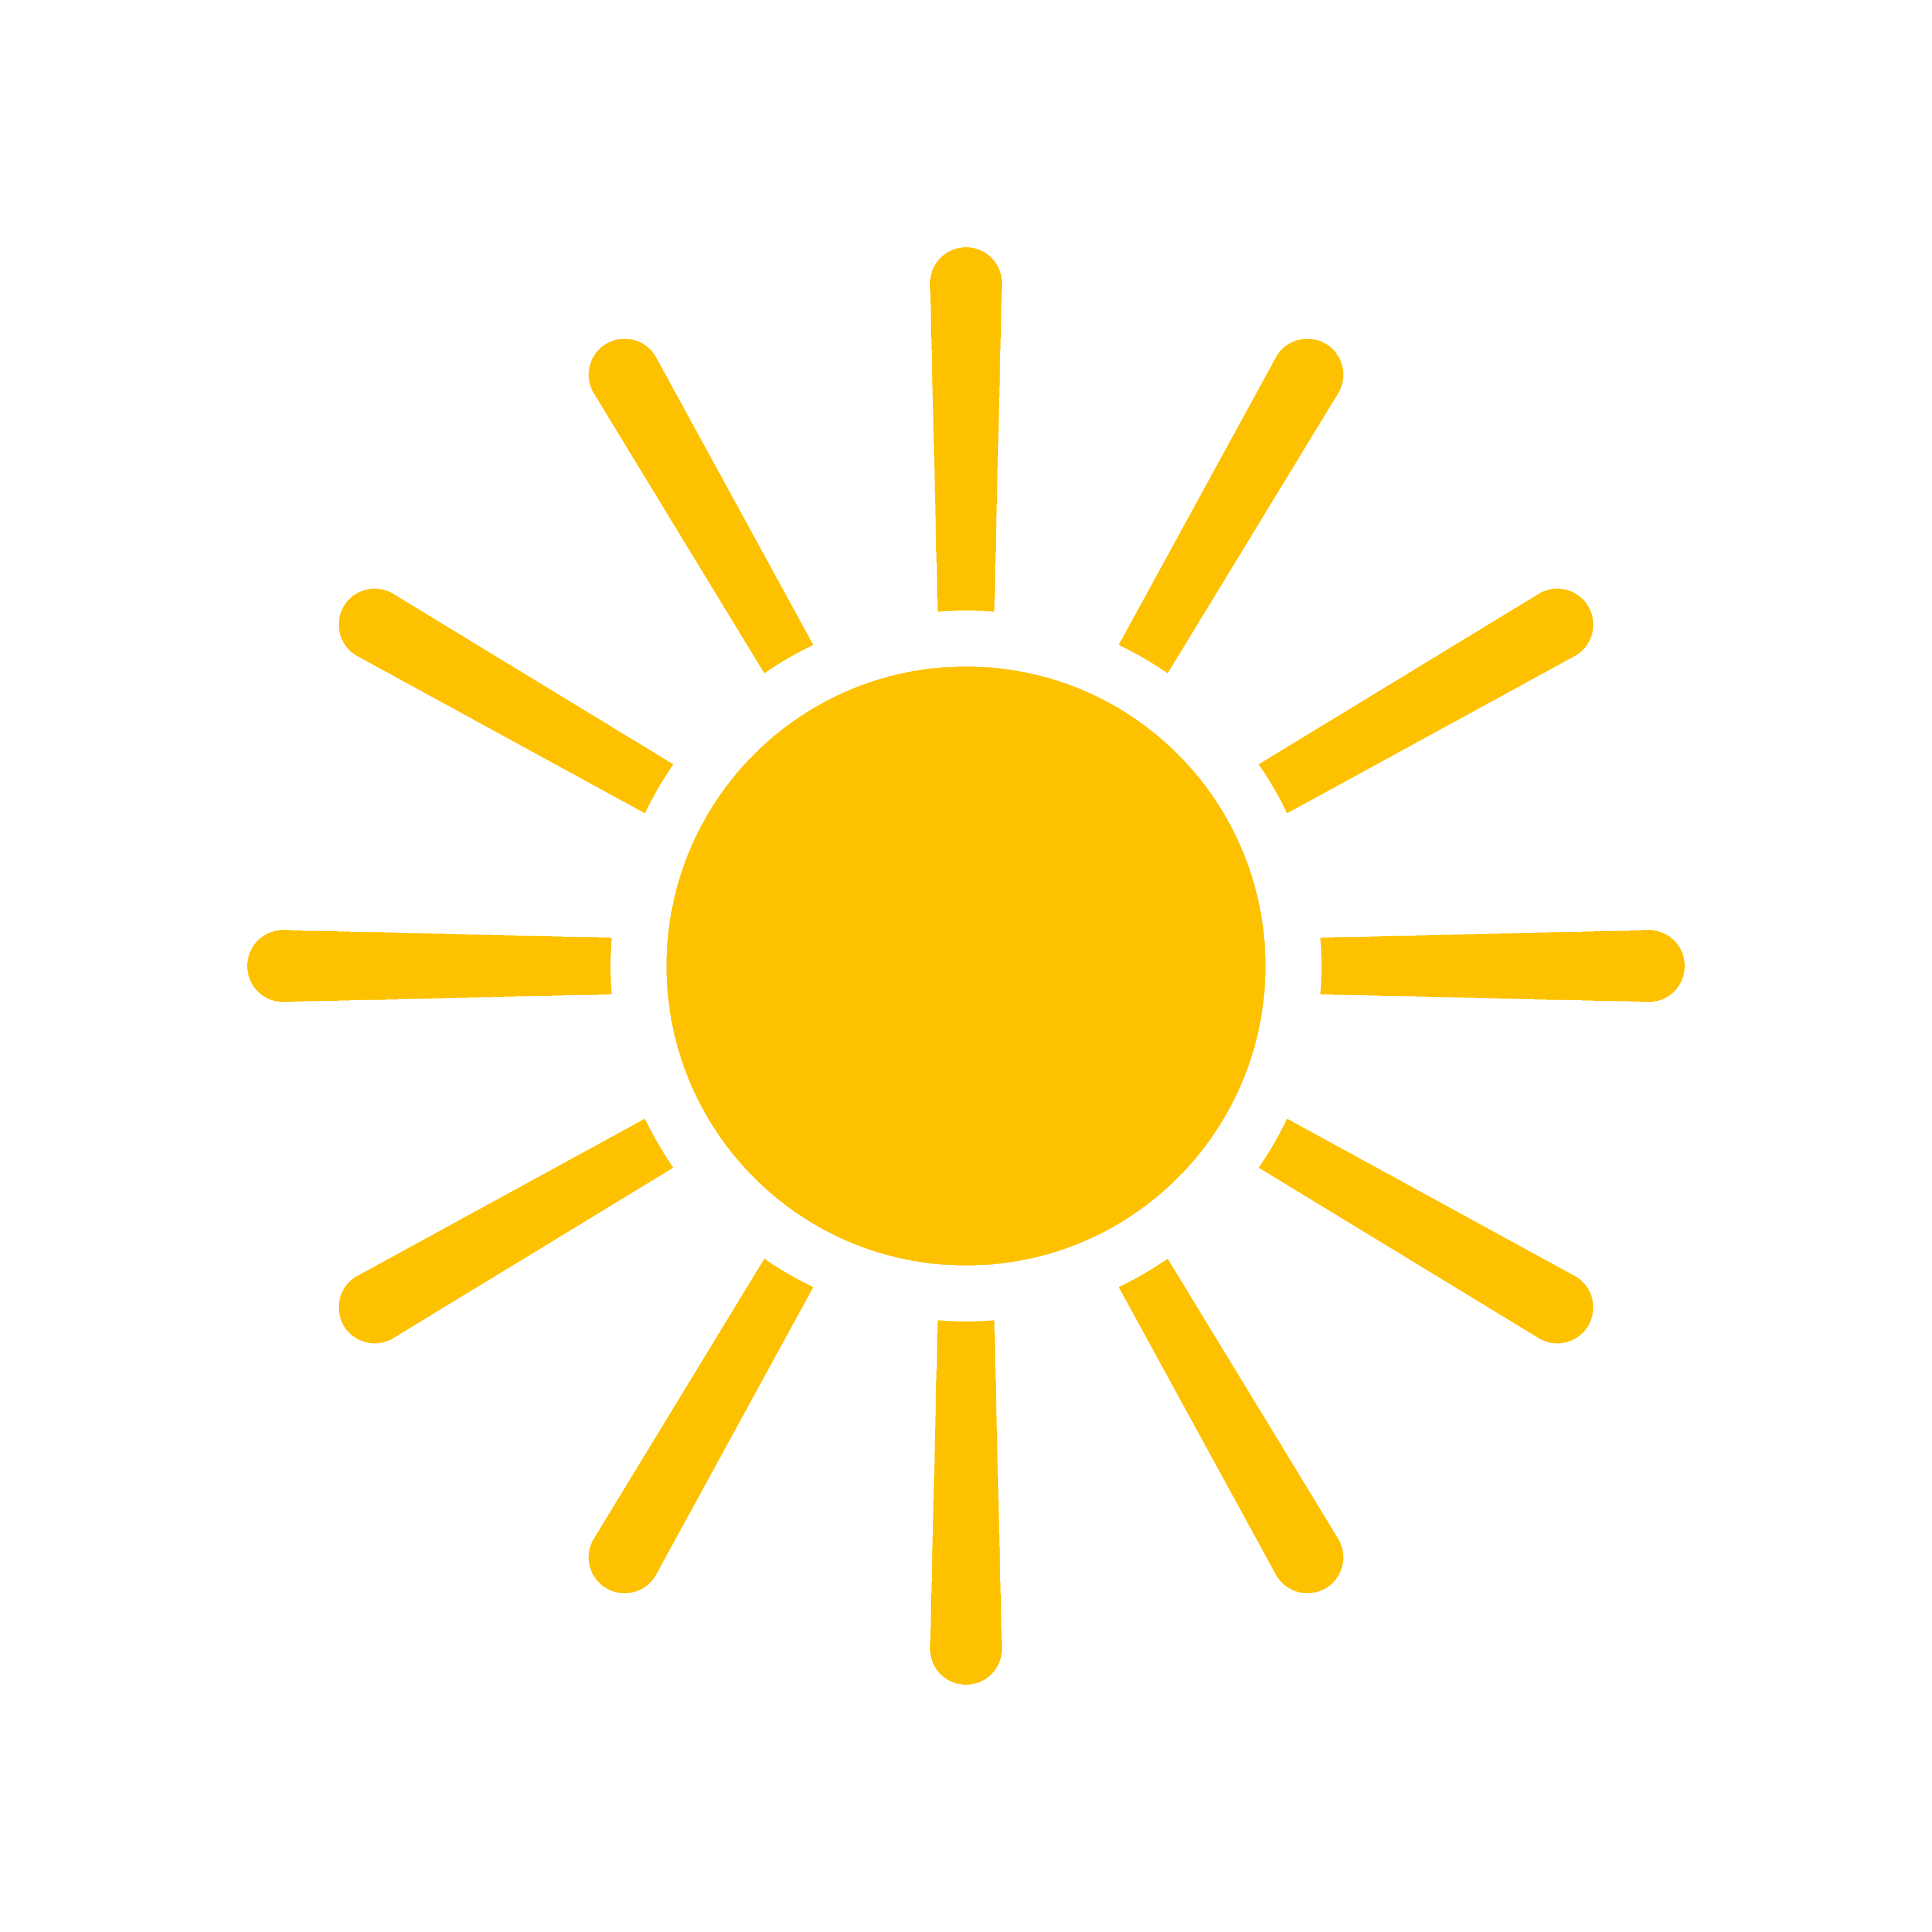 A icon of the sun